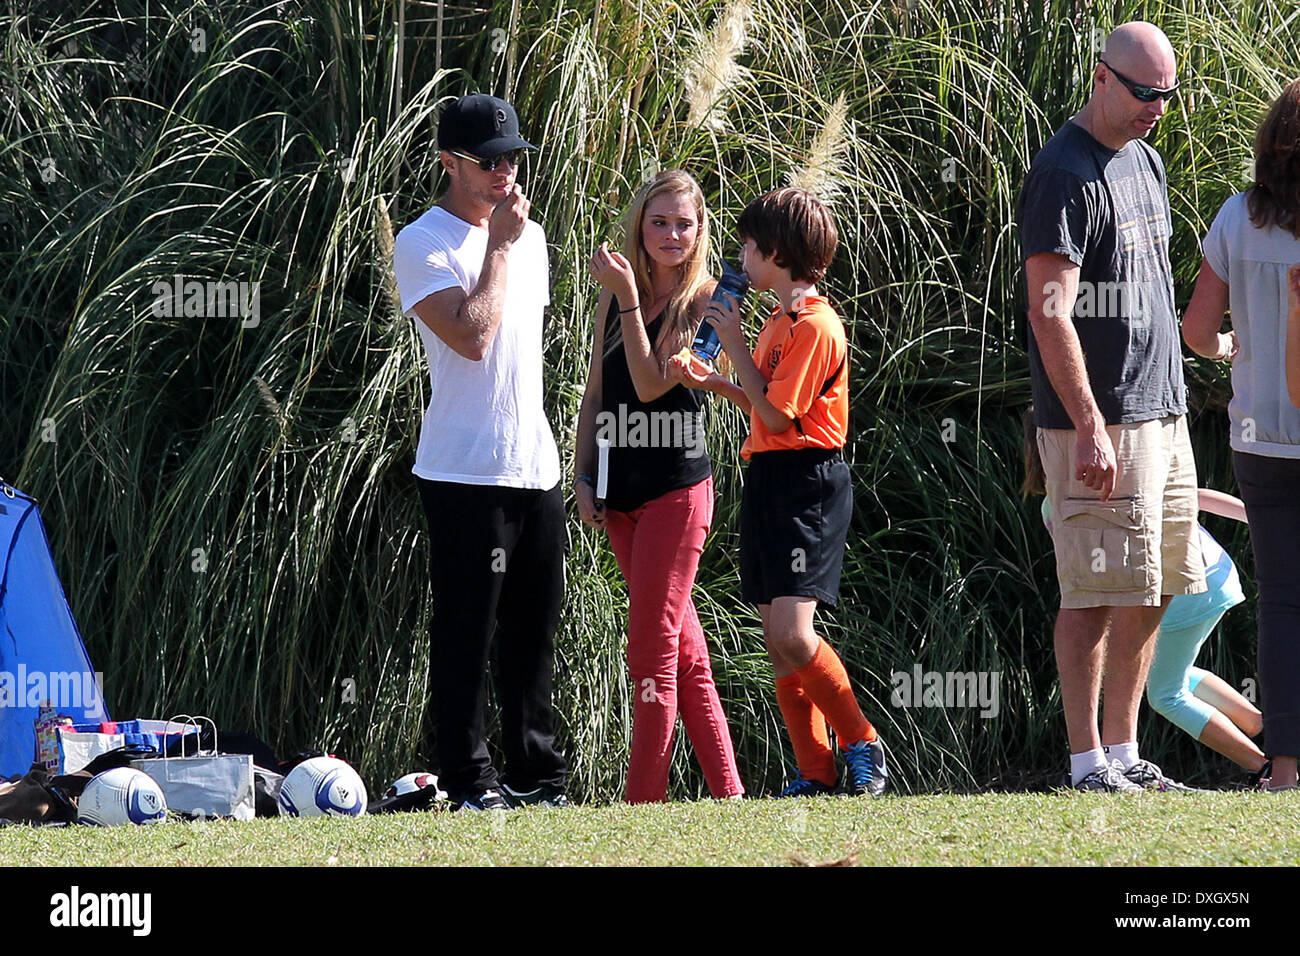 Ryan Phillippe and Paulina Slagter Ryan Phillippe at a park in Brentwood with his girlfriend to watch his son's soccer game Los Angeles, California - 03.11.12 Featuring: Ryan Phillippe and Paulina Slagter When: 03 Nov 2012 Stock Photo